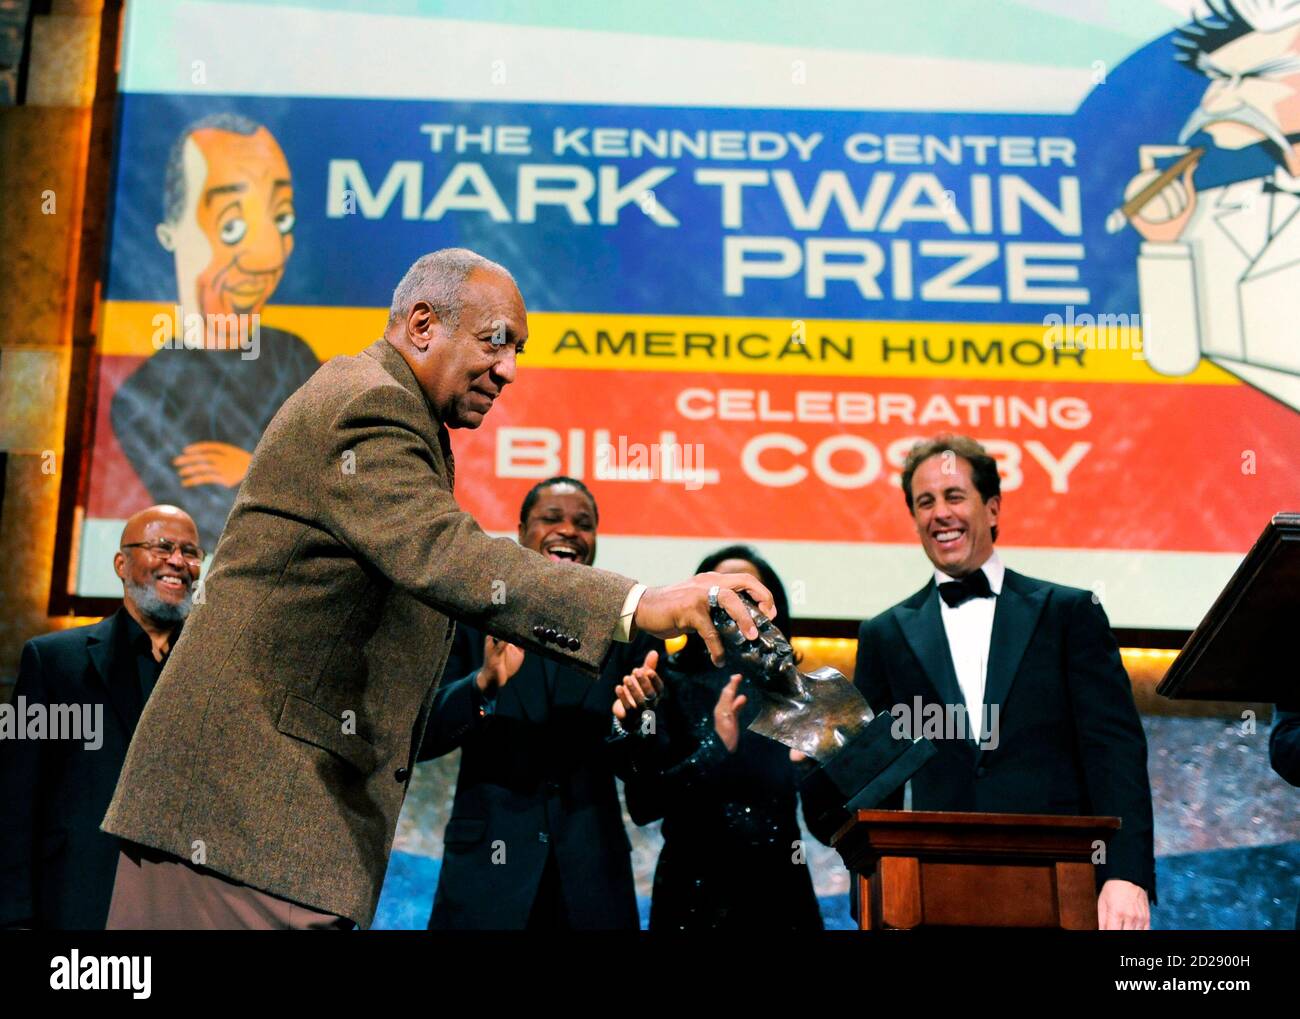 Mark twain award hires stock photography and images Alamy